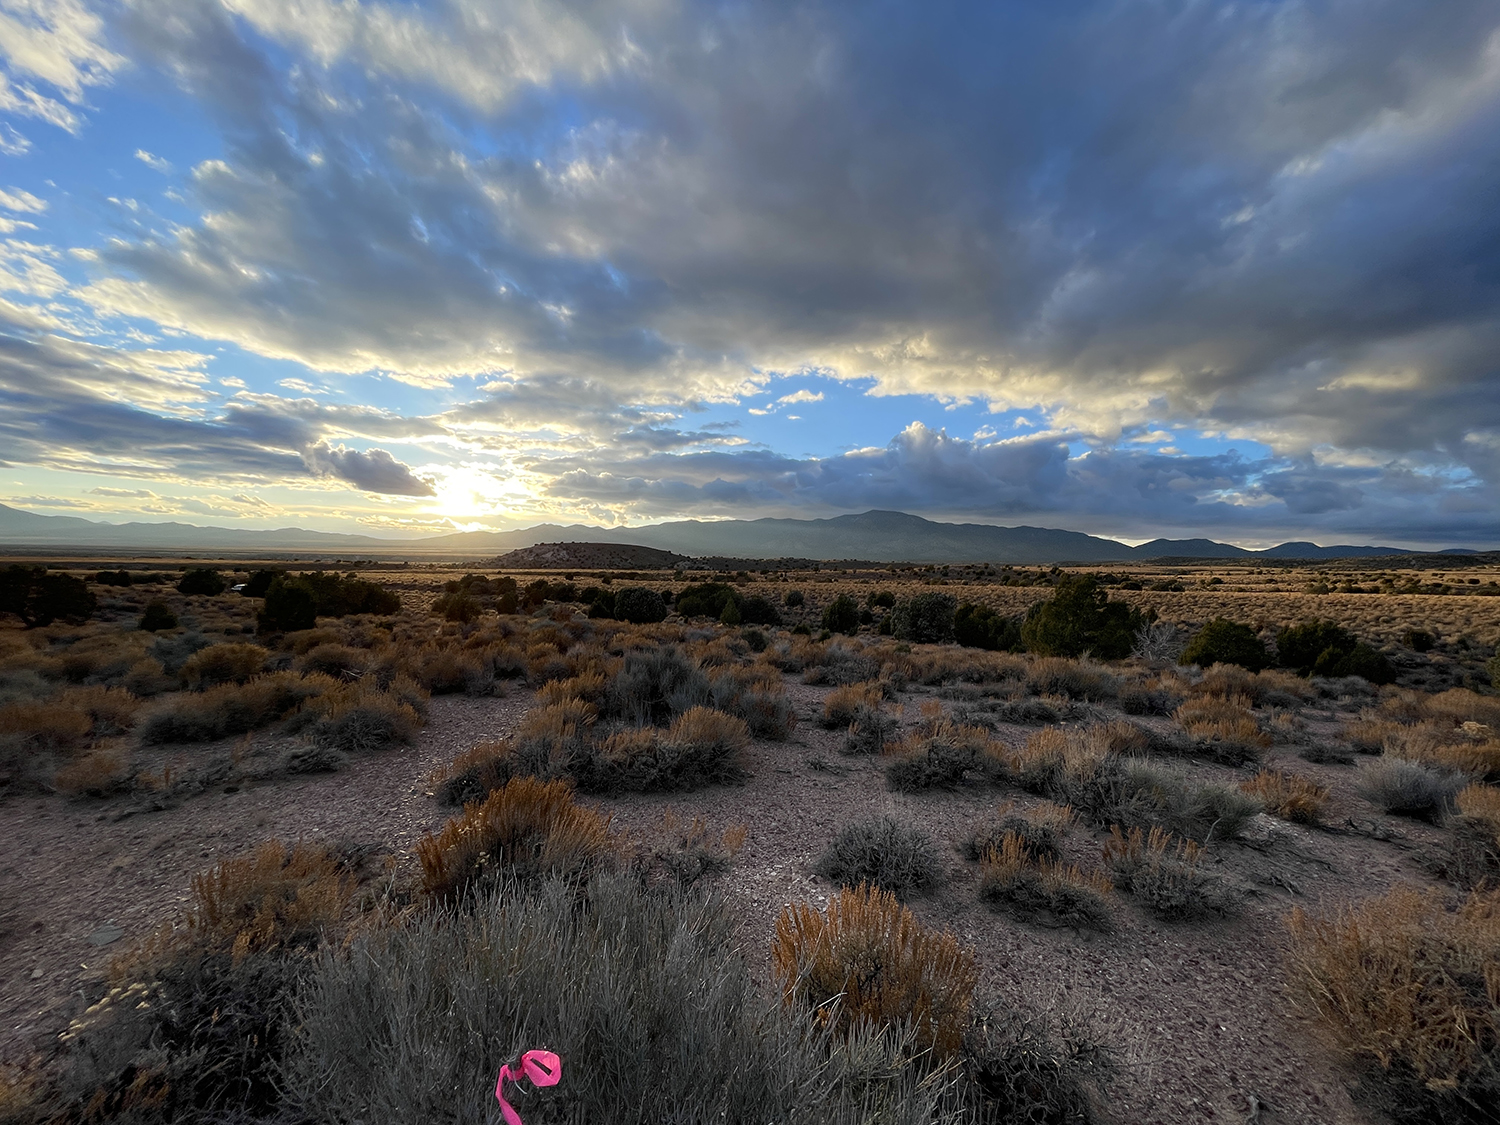 "Desert landscape at sunset with a pink flag in the foreground."